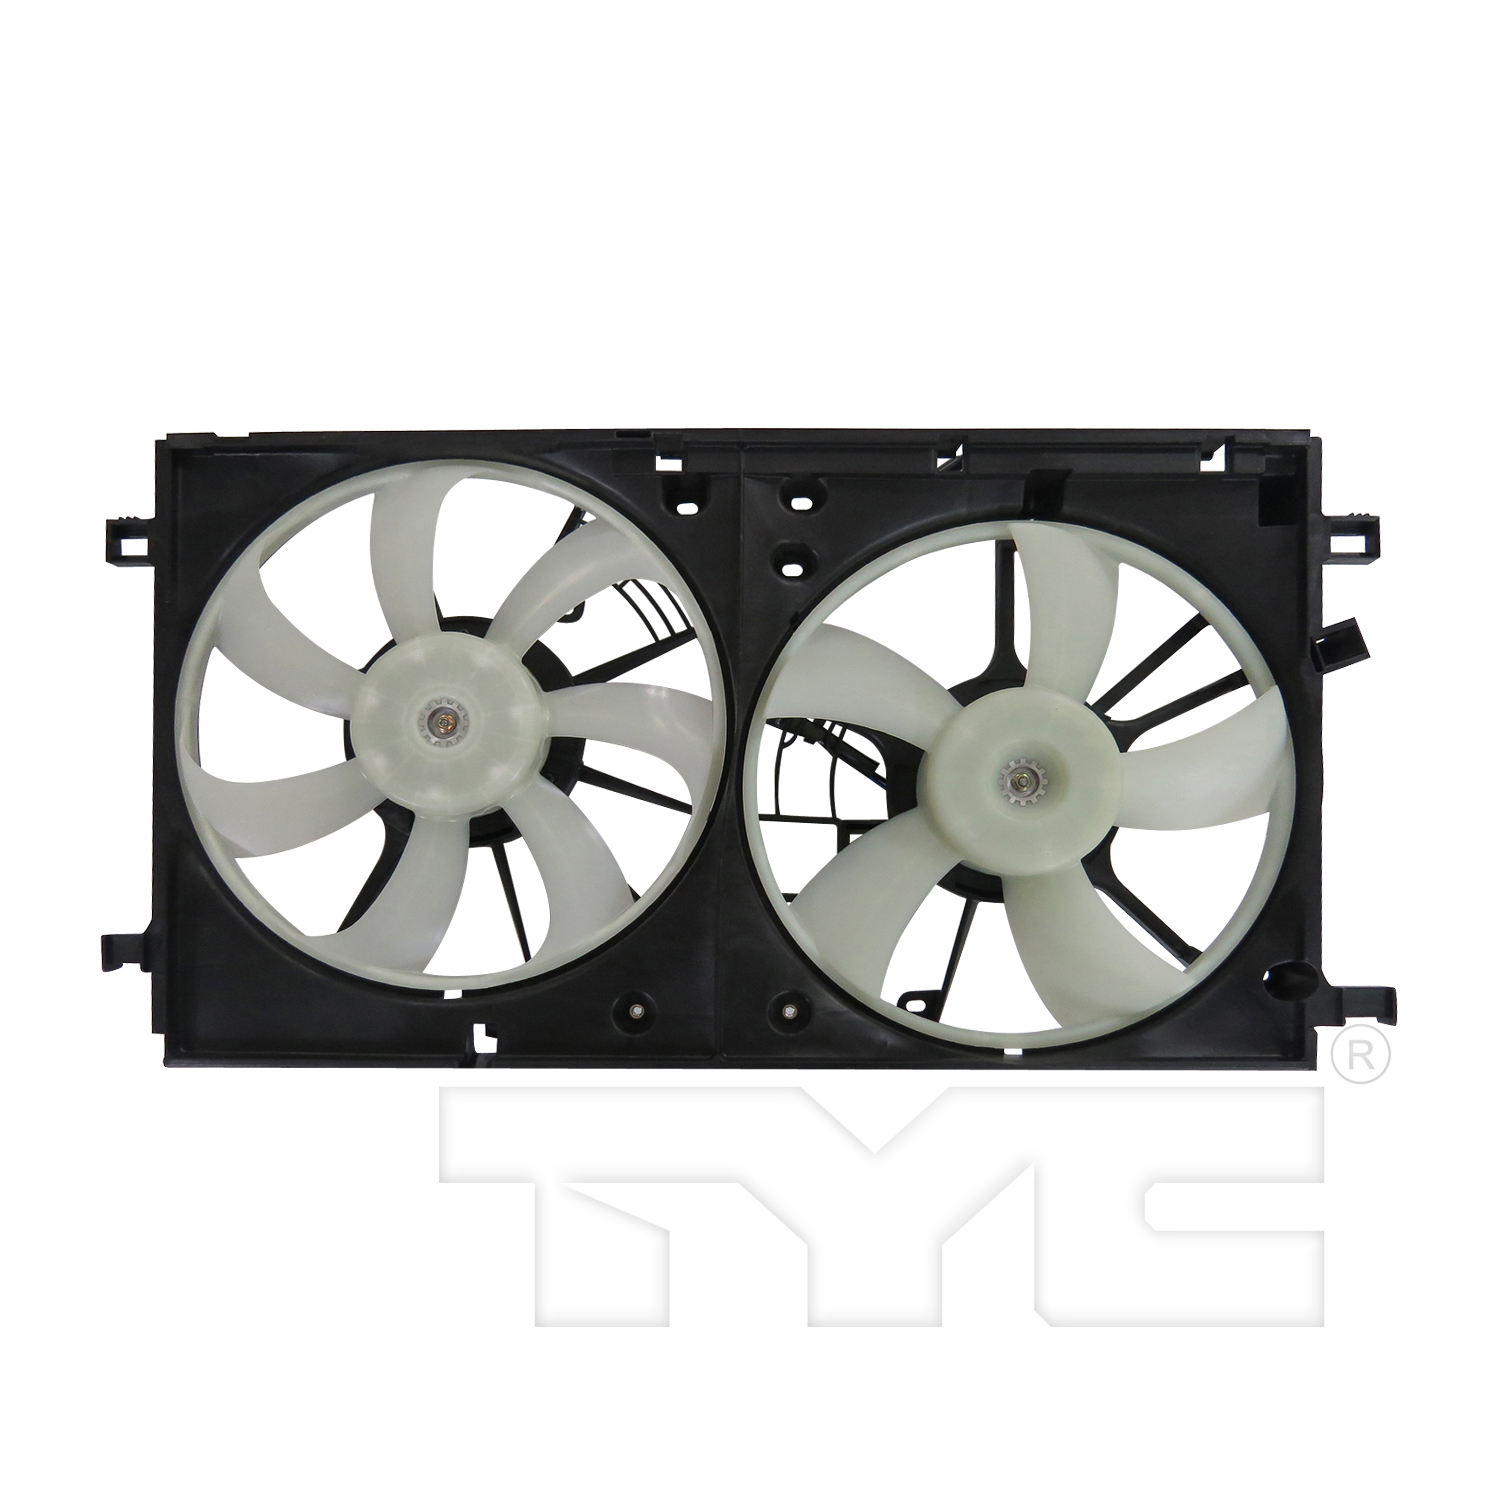 Aftermarket FAN ASSEMBLY/FAN SHROUDS for TOYOTA - PRIUS, PRIUS,16-22,Radiator cooling fan assy